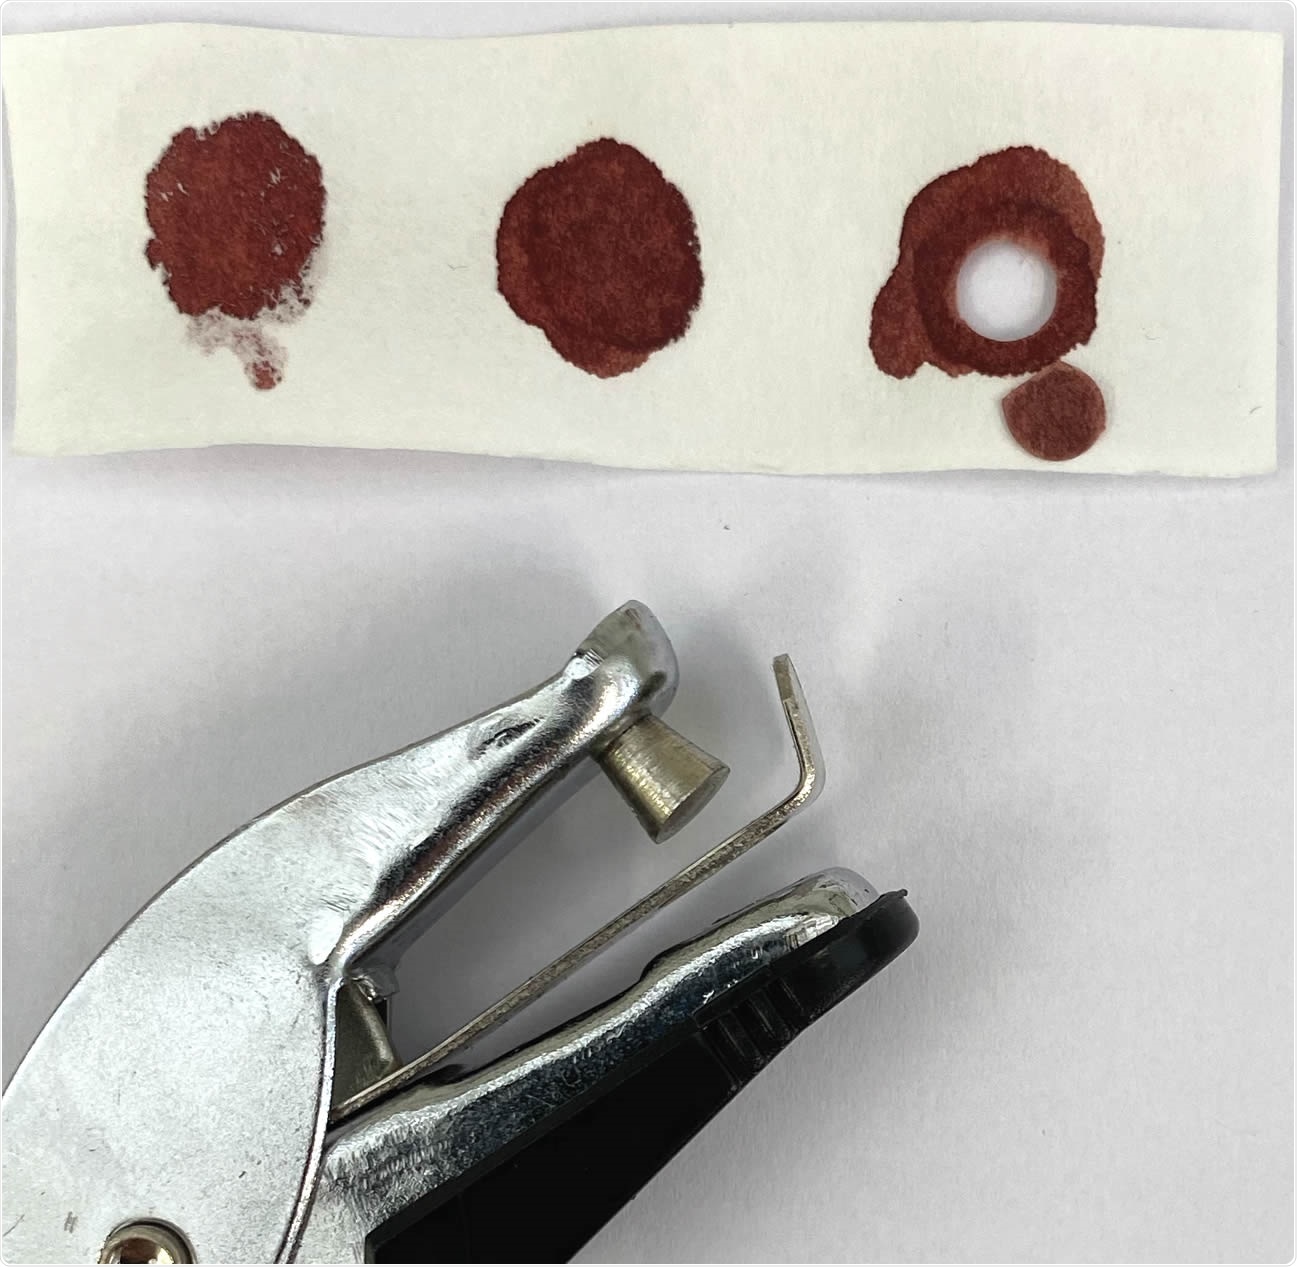 Dried blood samples (DBS) obtained by finger pricking with commercially available lancing devices. A 2.5 cm (W) x 7.5 cm (L) filter paper with three blood spots from the same volunteer and commercially available paper hole punching device were used to make DBS (arrowhead) from which blood was eluted for ELISA testing.